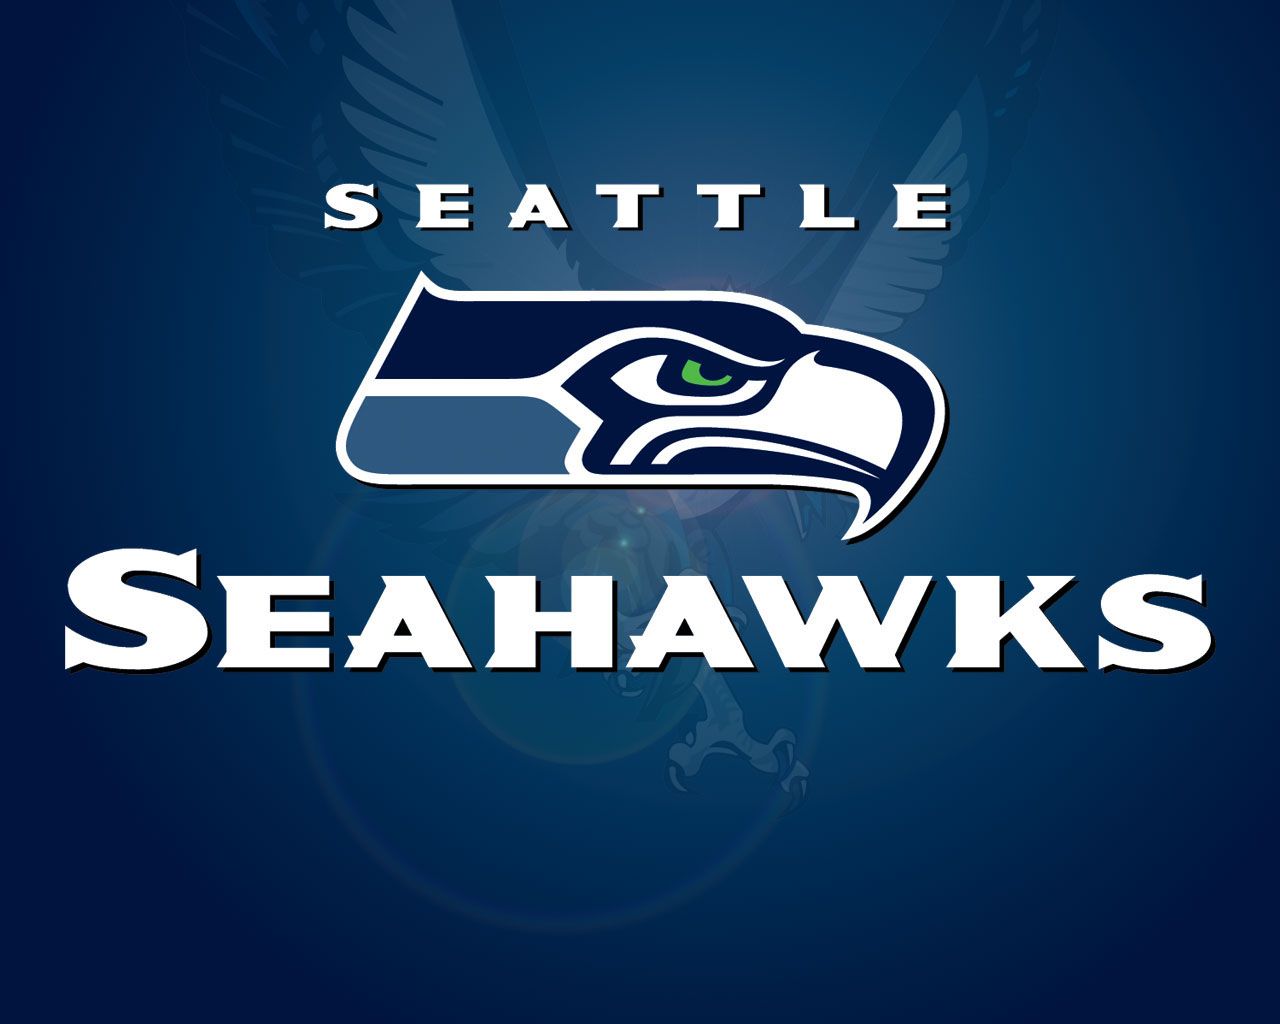 Seattle Seahawks Name And Logo Wallpaper Photo